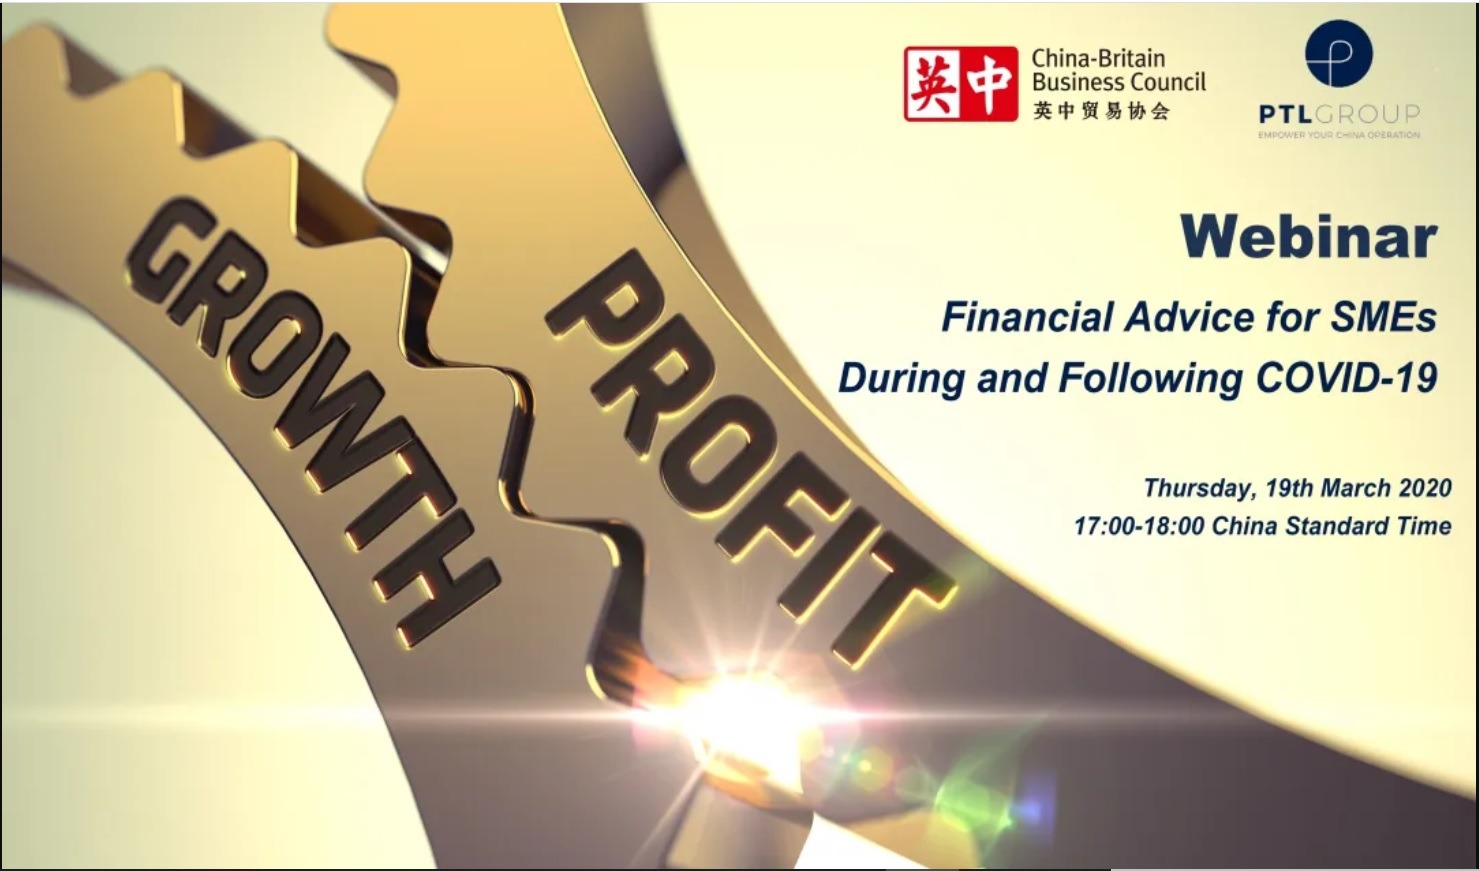 Financial advice for SMEs during and following Covid-19 - PTL Group